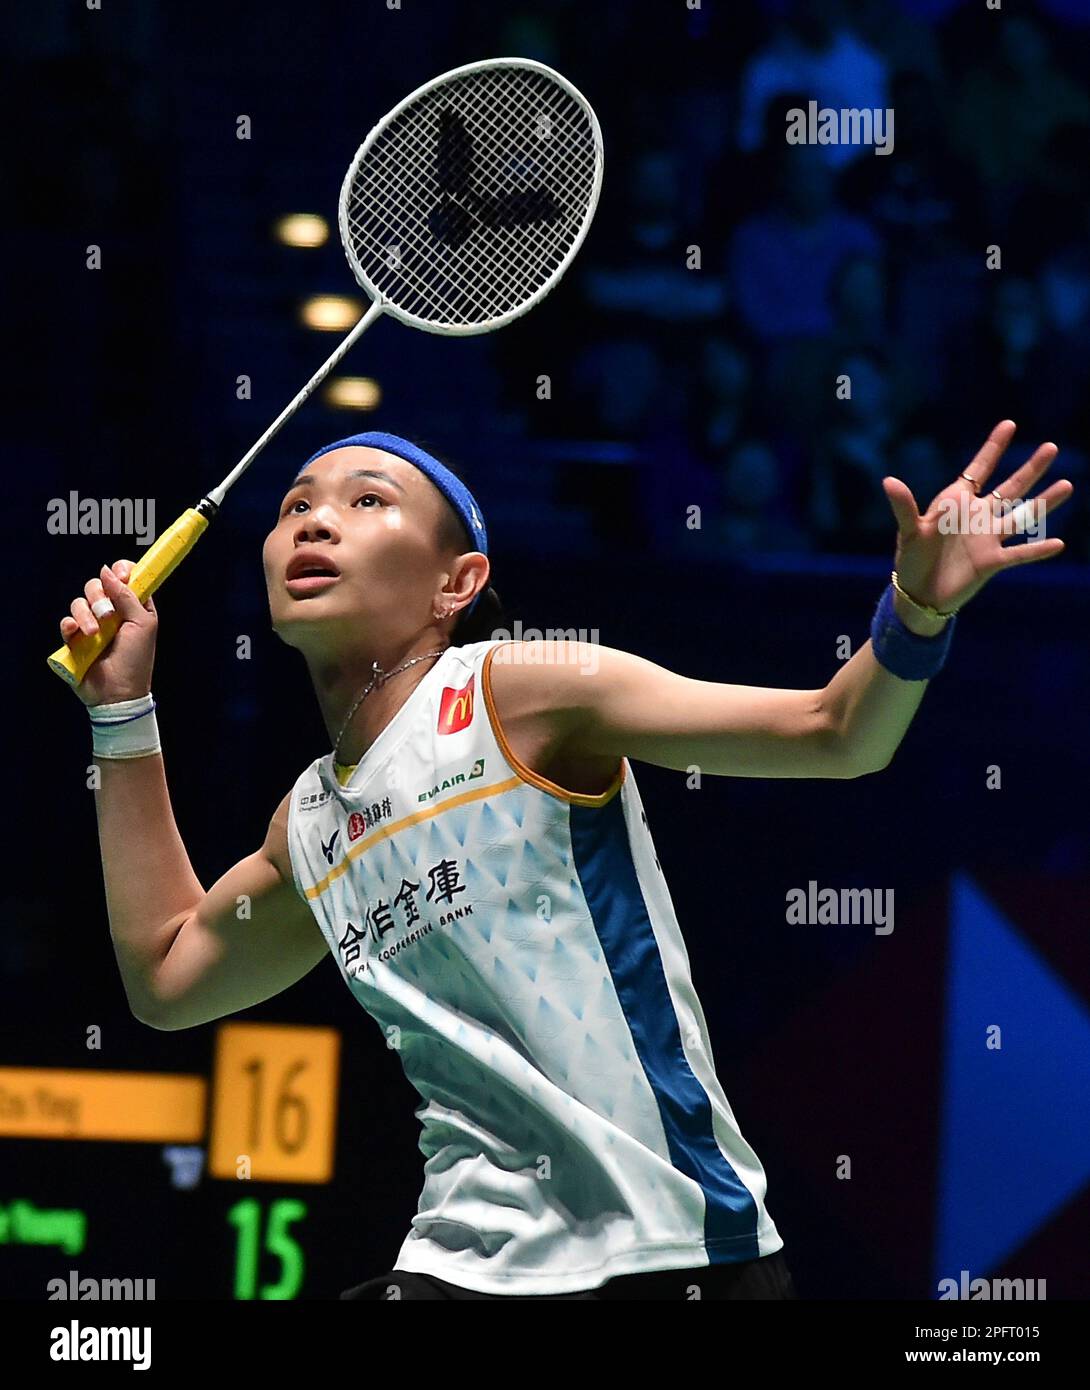 Chinese Taipeis Tai Tzu Ying returns a shot during the womens semi final match against Koreas An Se Young in the All England Open Badminton Championships at the Utilita Arena in Birmingham,